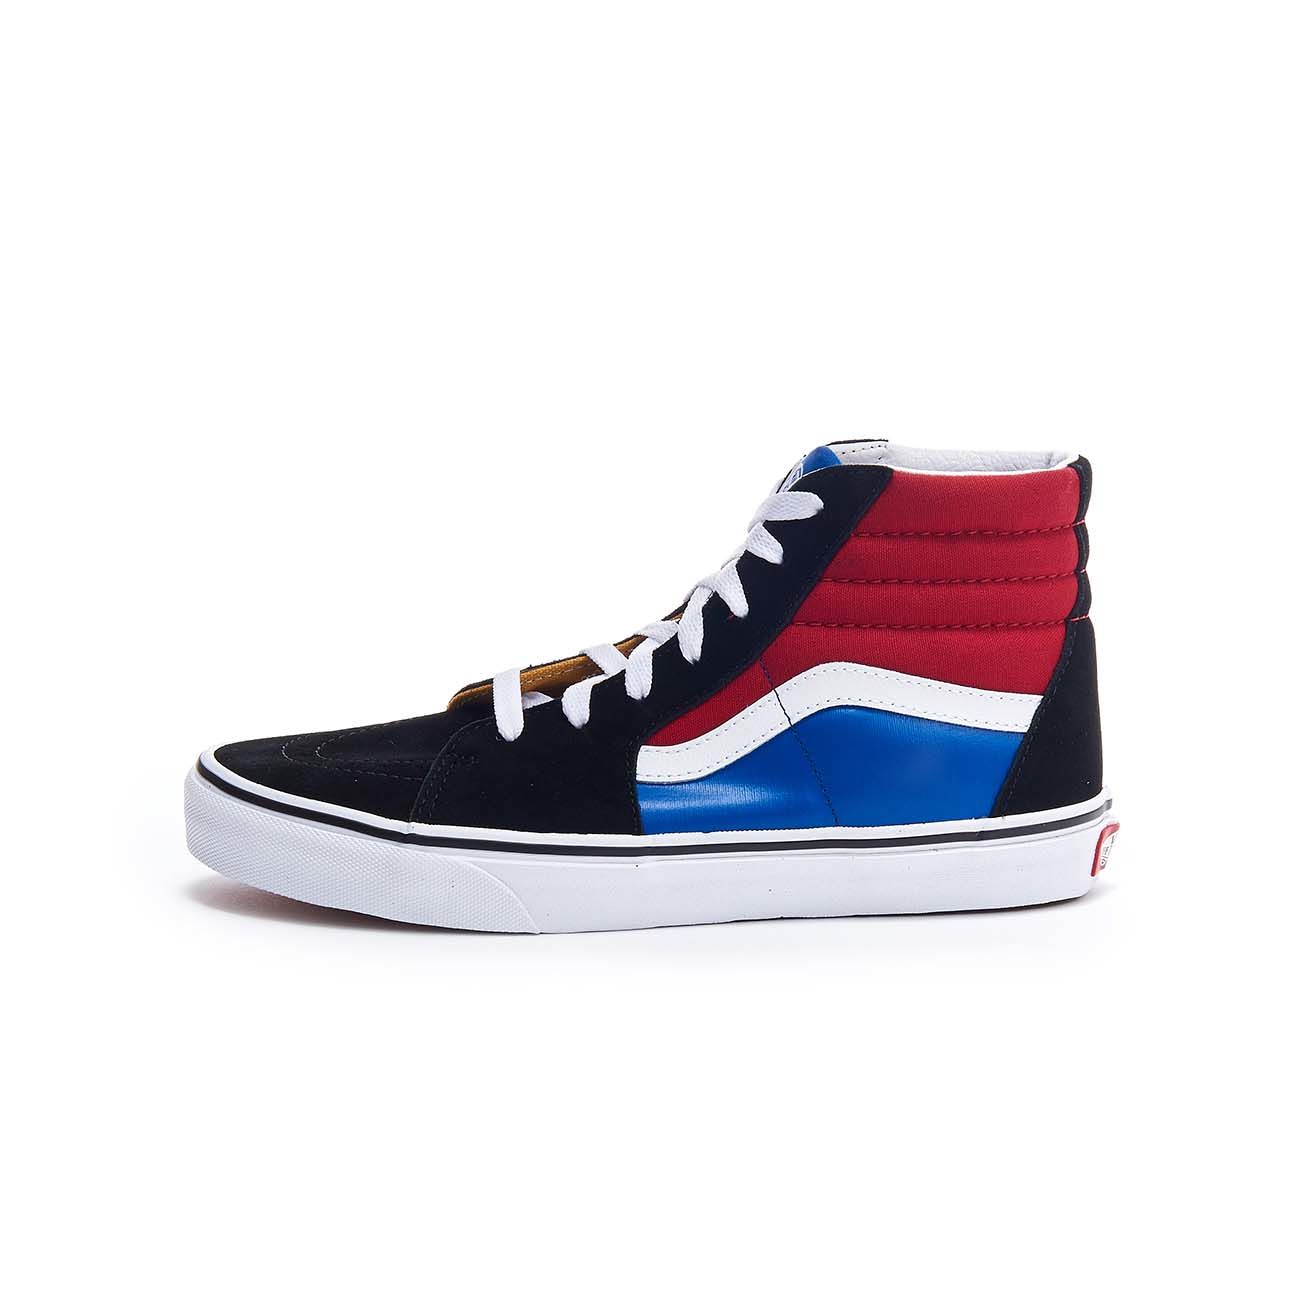 VANS SK8-HI IN Mascheroni Store FABRIC Pepper Black | ECO-LEATHER AND Chilli Kid SNEAKER HIGH